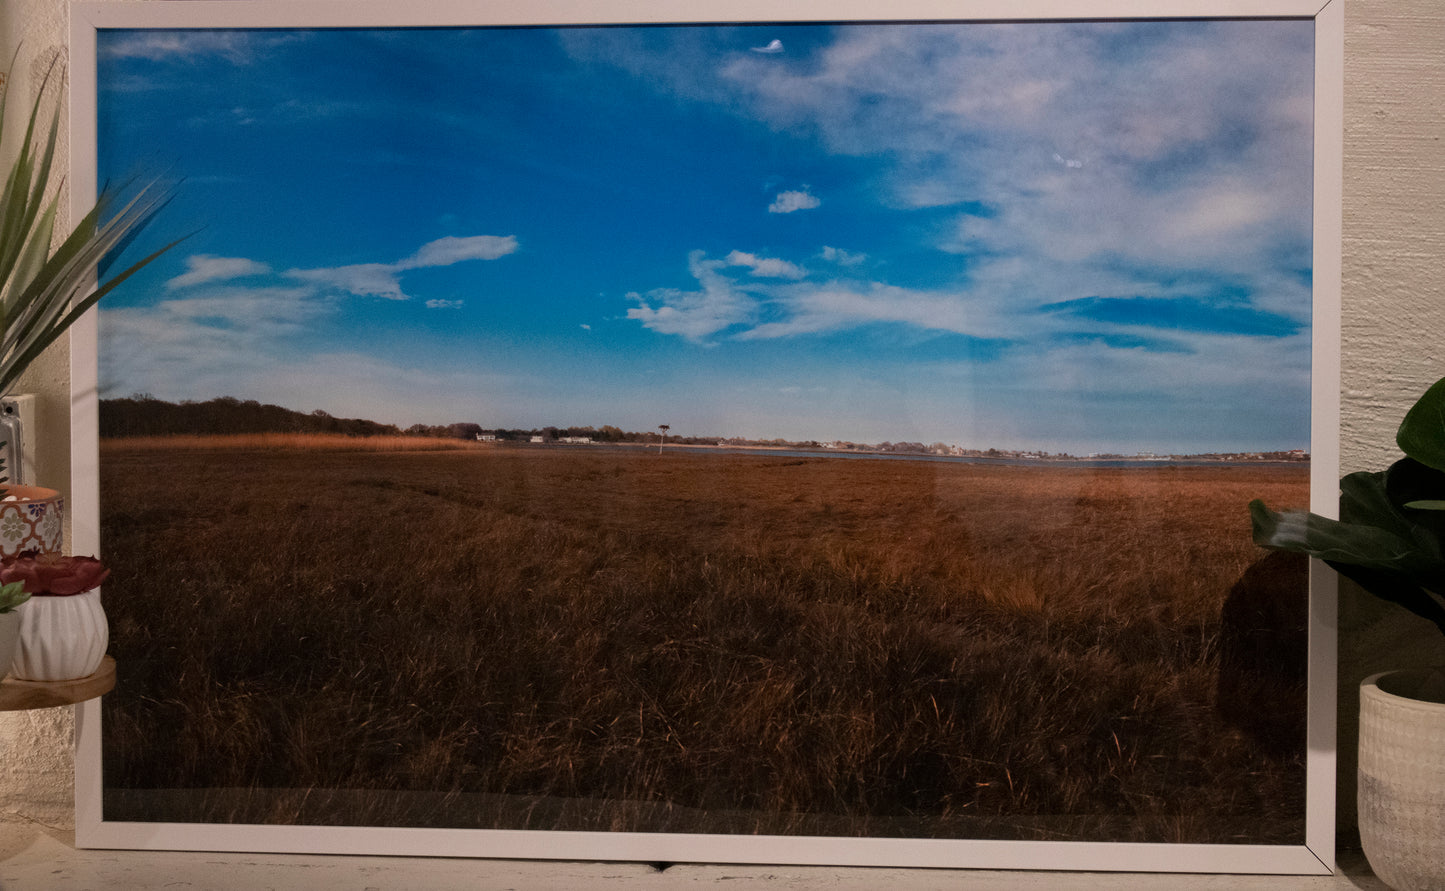 Jeremy Dennis - "The Point, Shinnecock Indian Reservation" Framed 24x36 Photograph